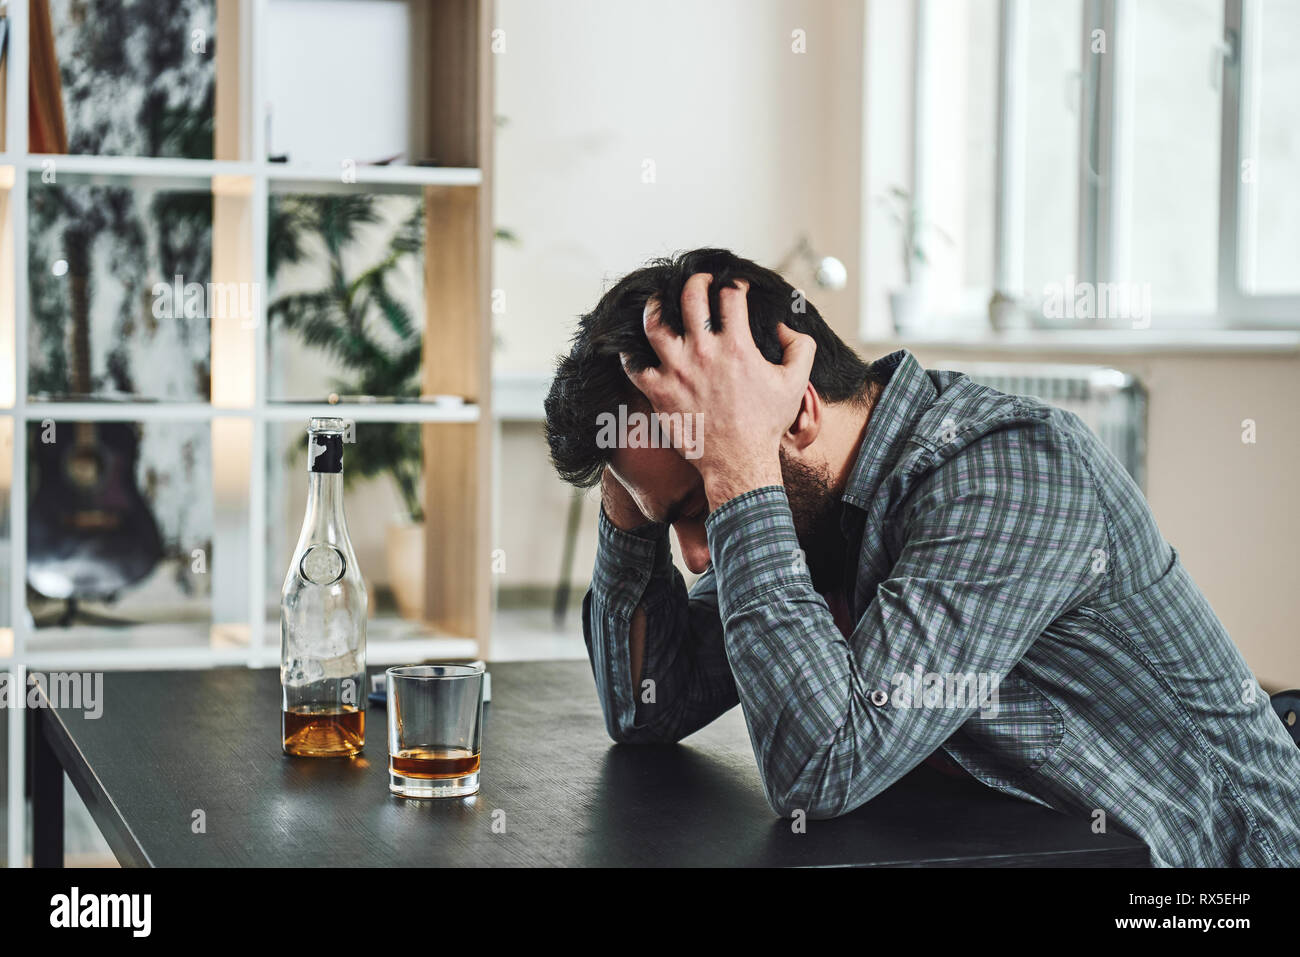 Drinking trouble. Depressed man sits at the table with his head in his hands. A bottle and a glass of whiskey stand in front of him. Side view Stock Photo